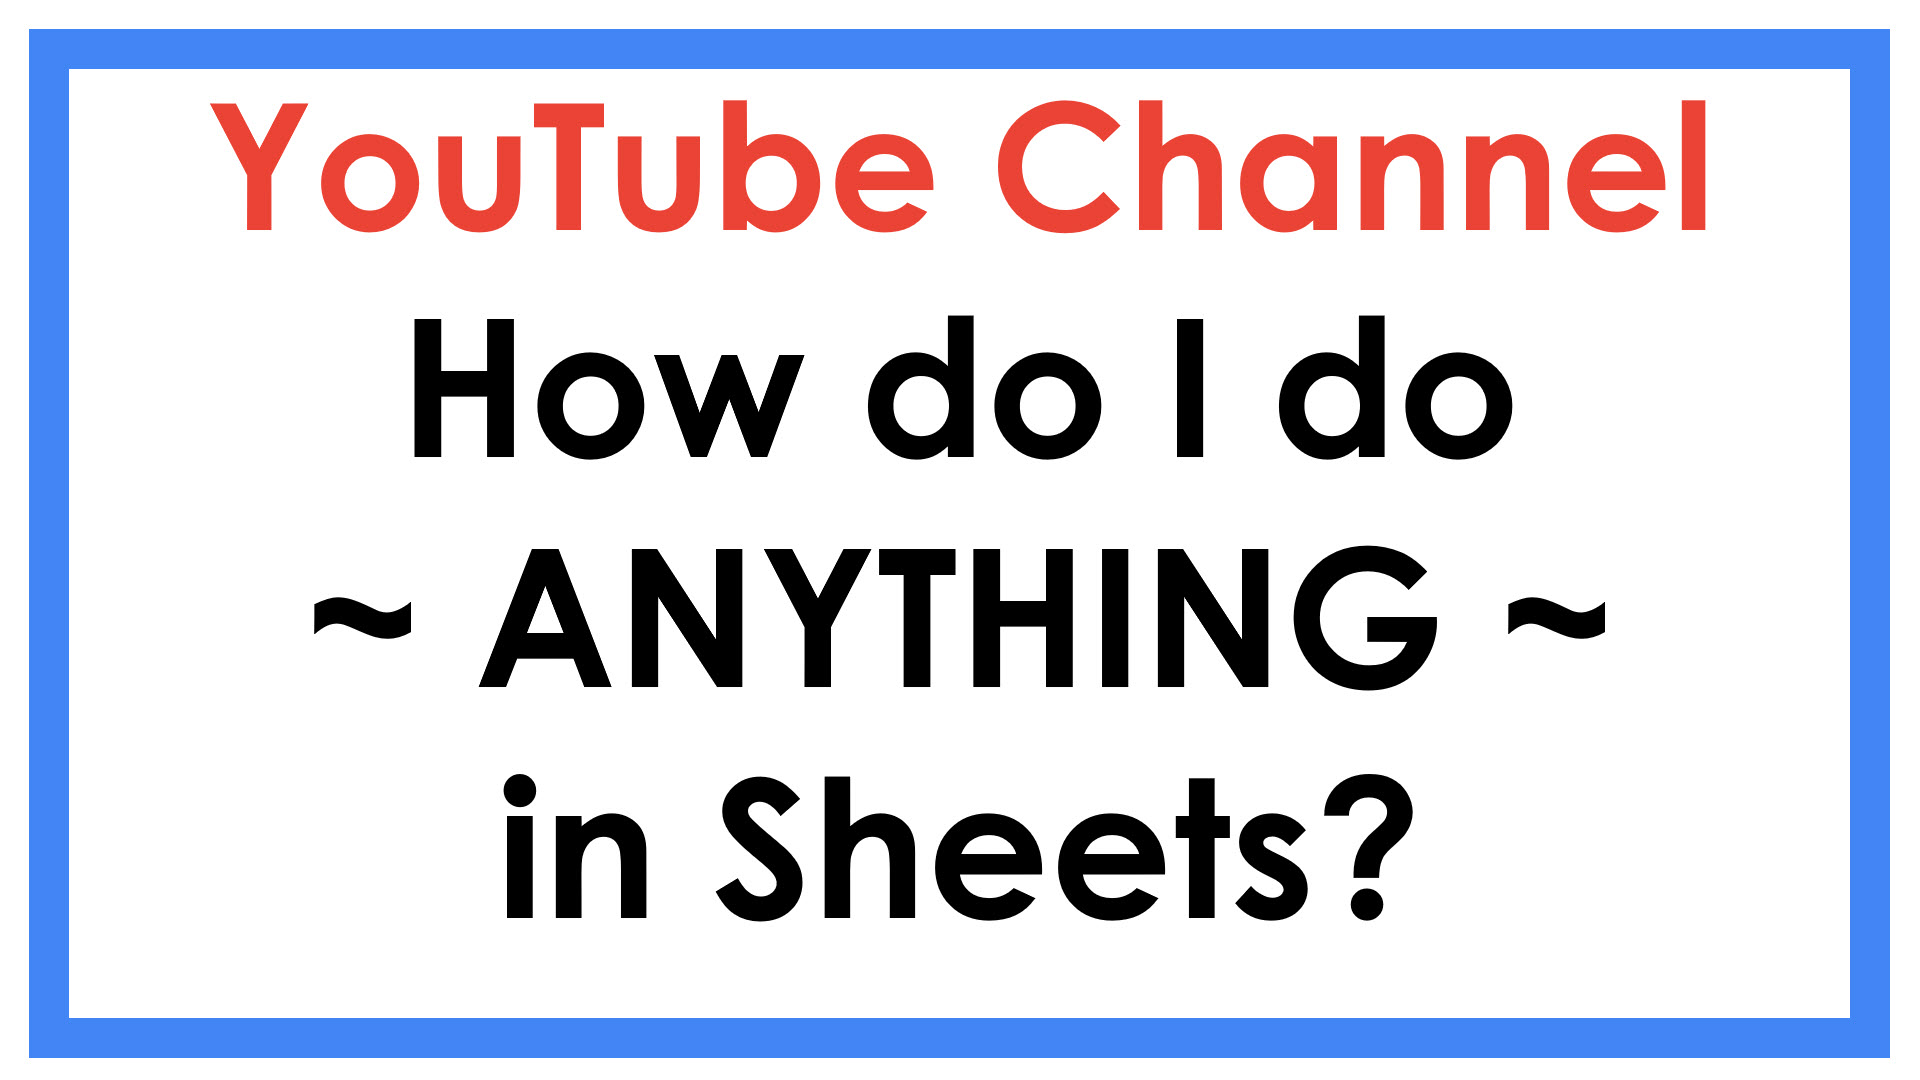 Yotube Channel: How do I do anything in sheets?